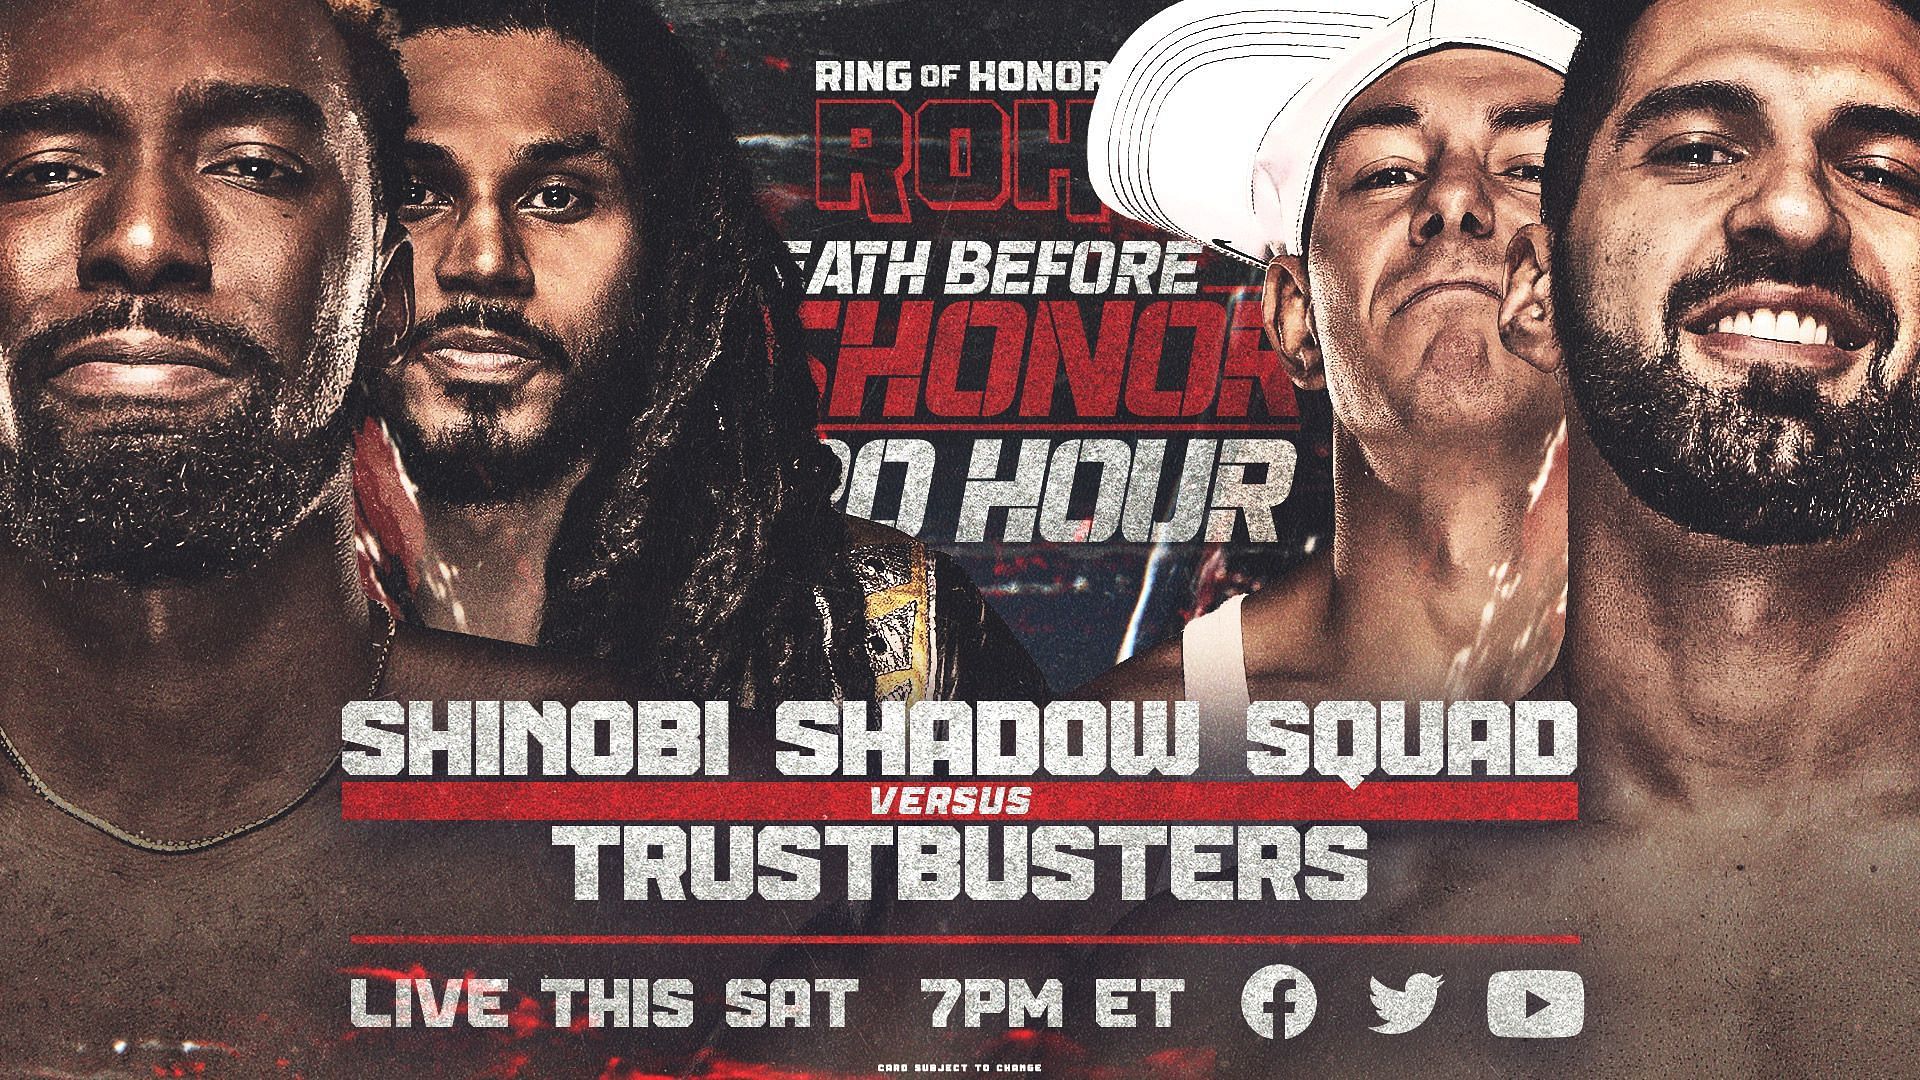 A new tag team debuts at Death Before Dishonor